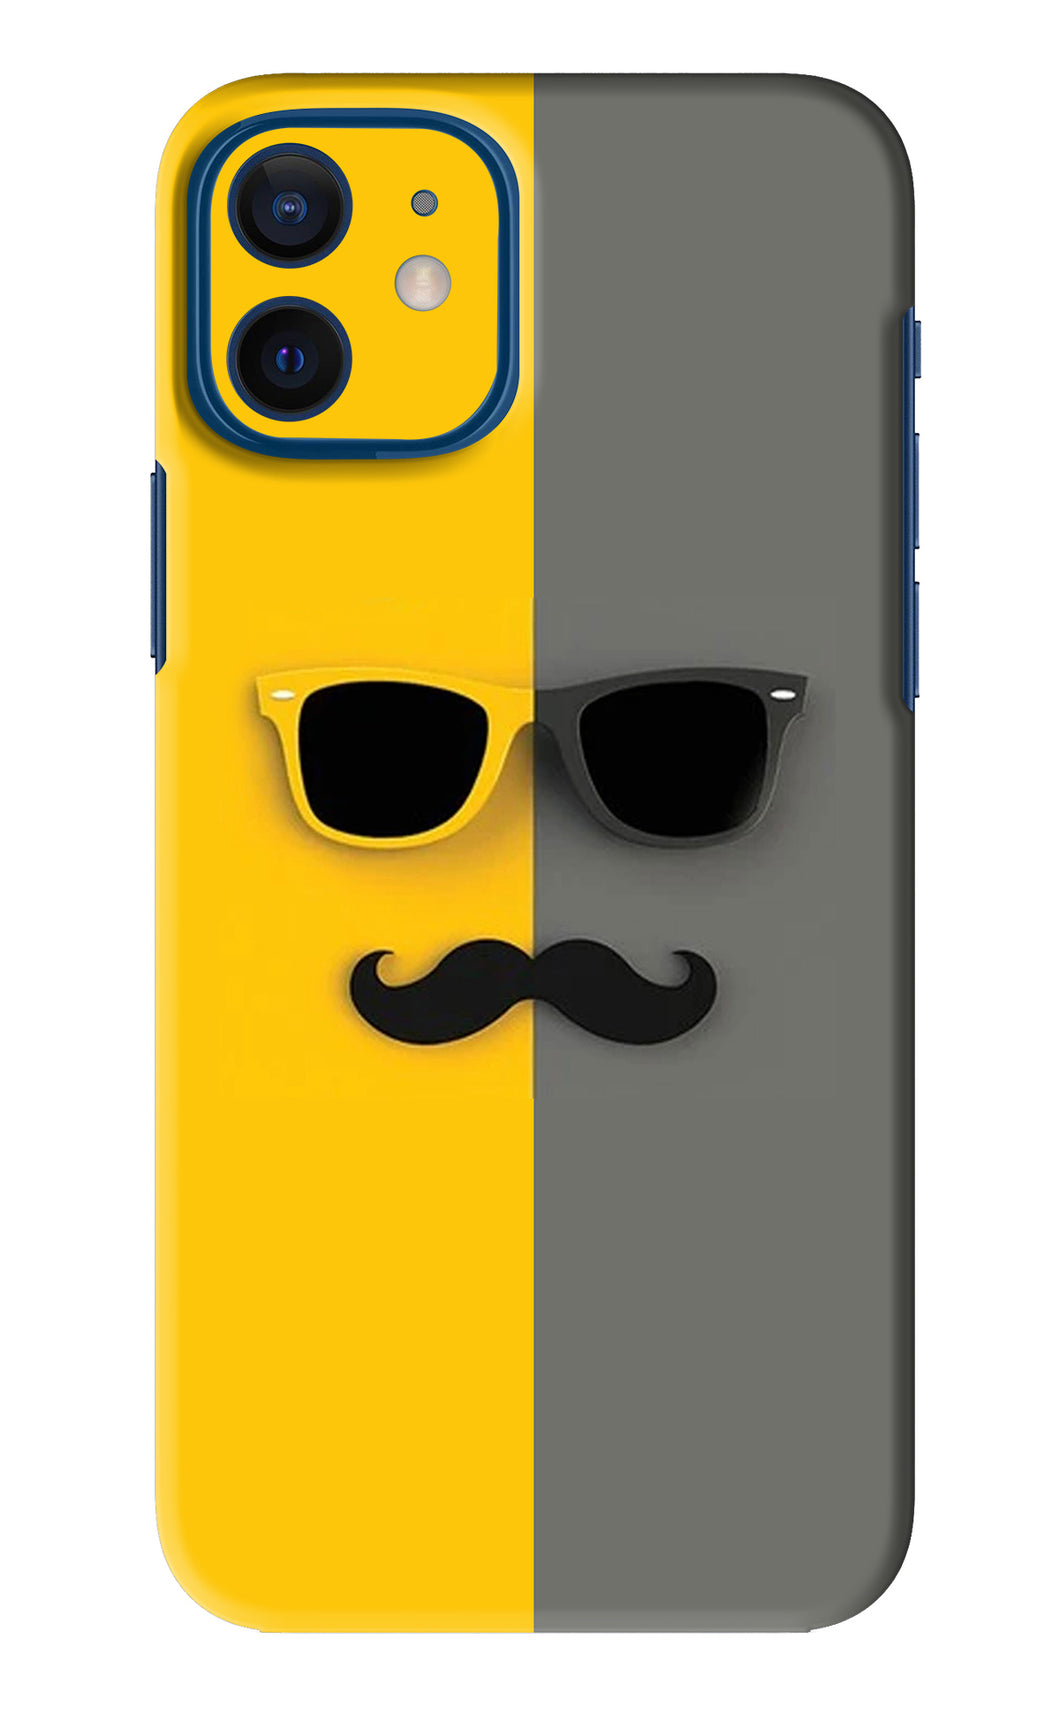 Sunglasses with Mustache iPhone 12 Back Skin Wrap